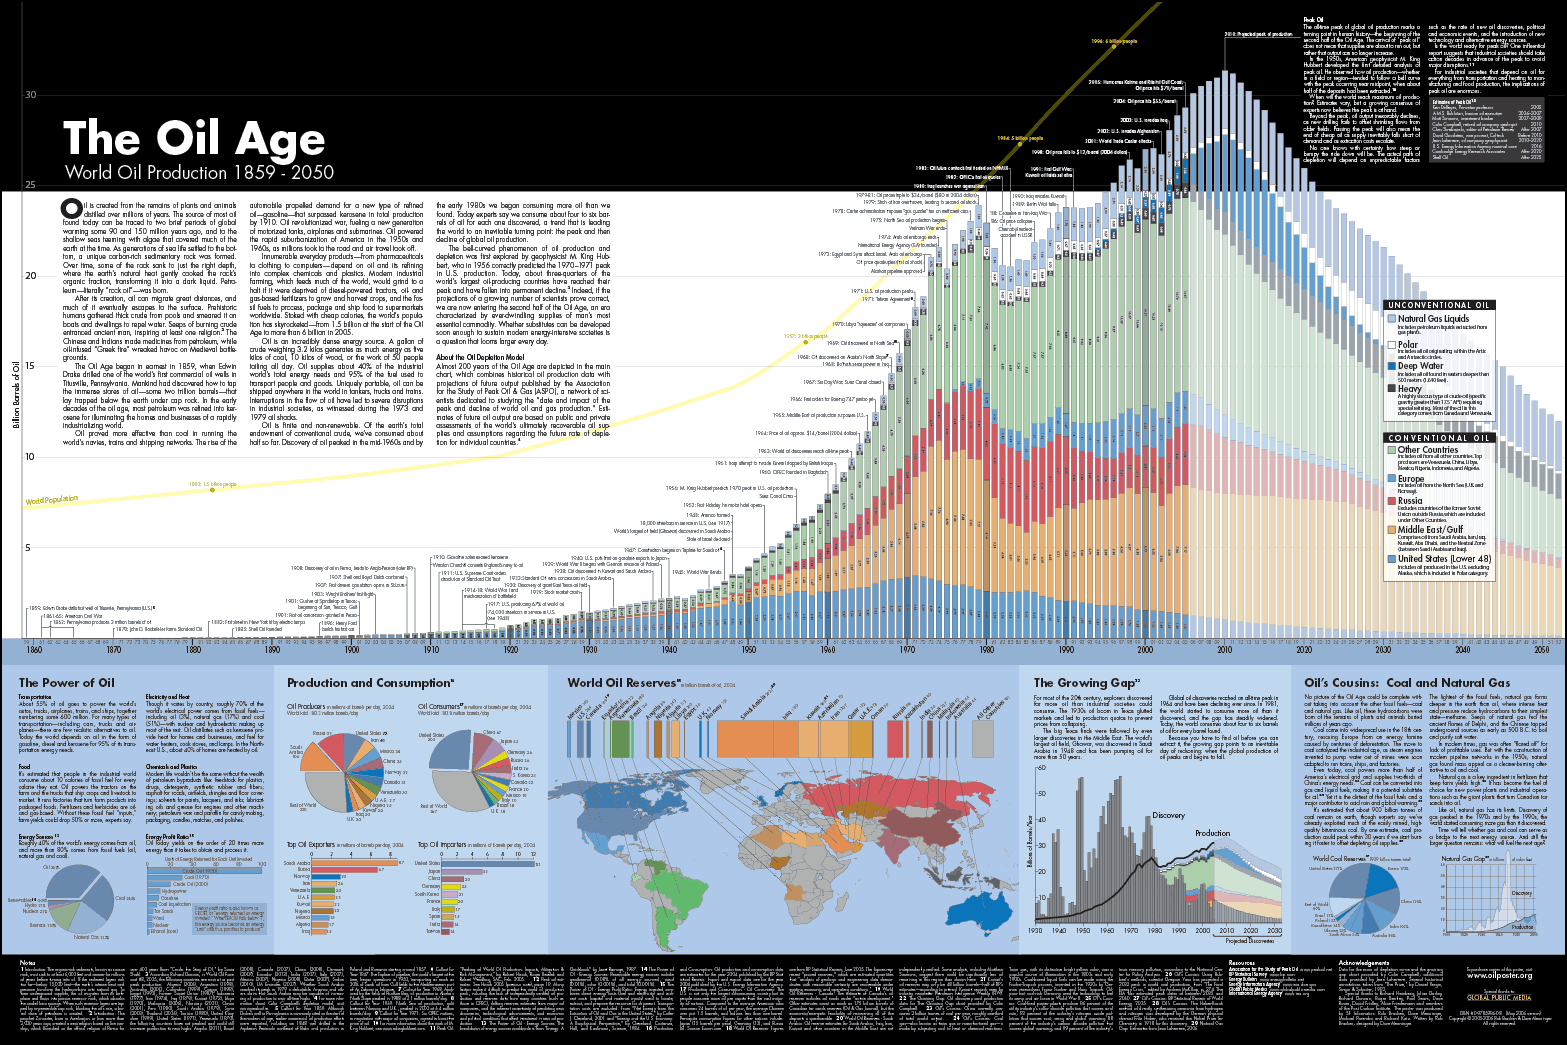 The Oil Age Infographic